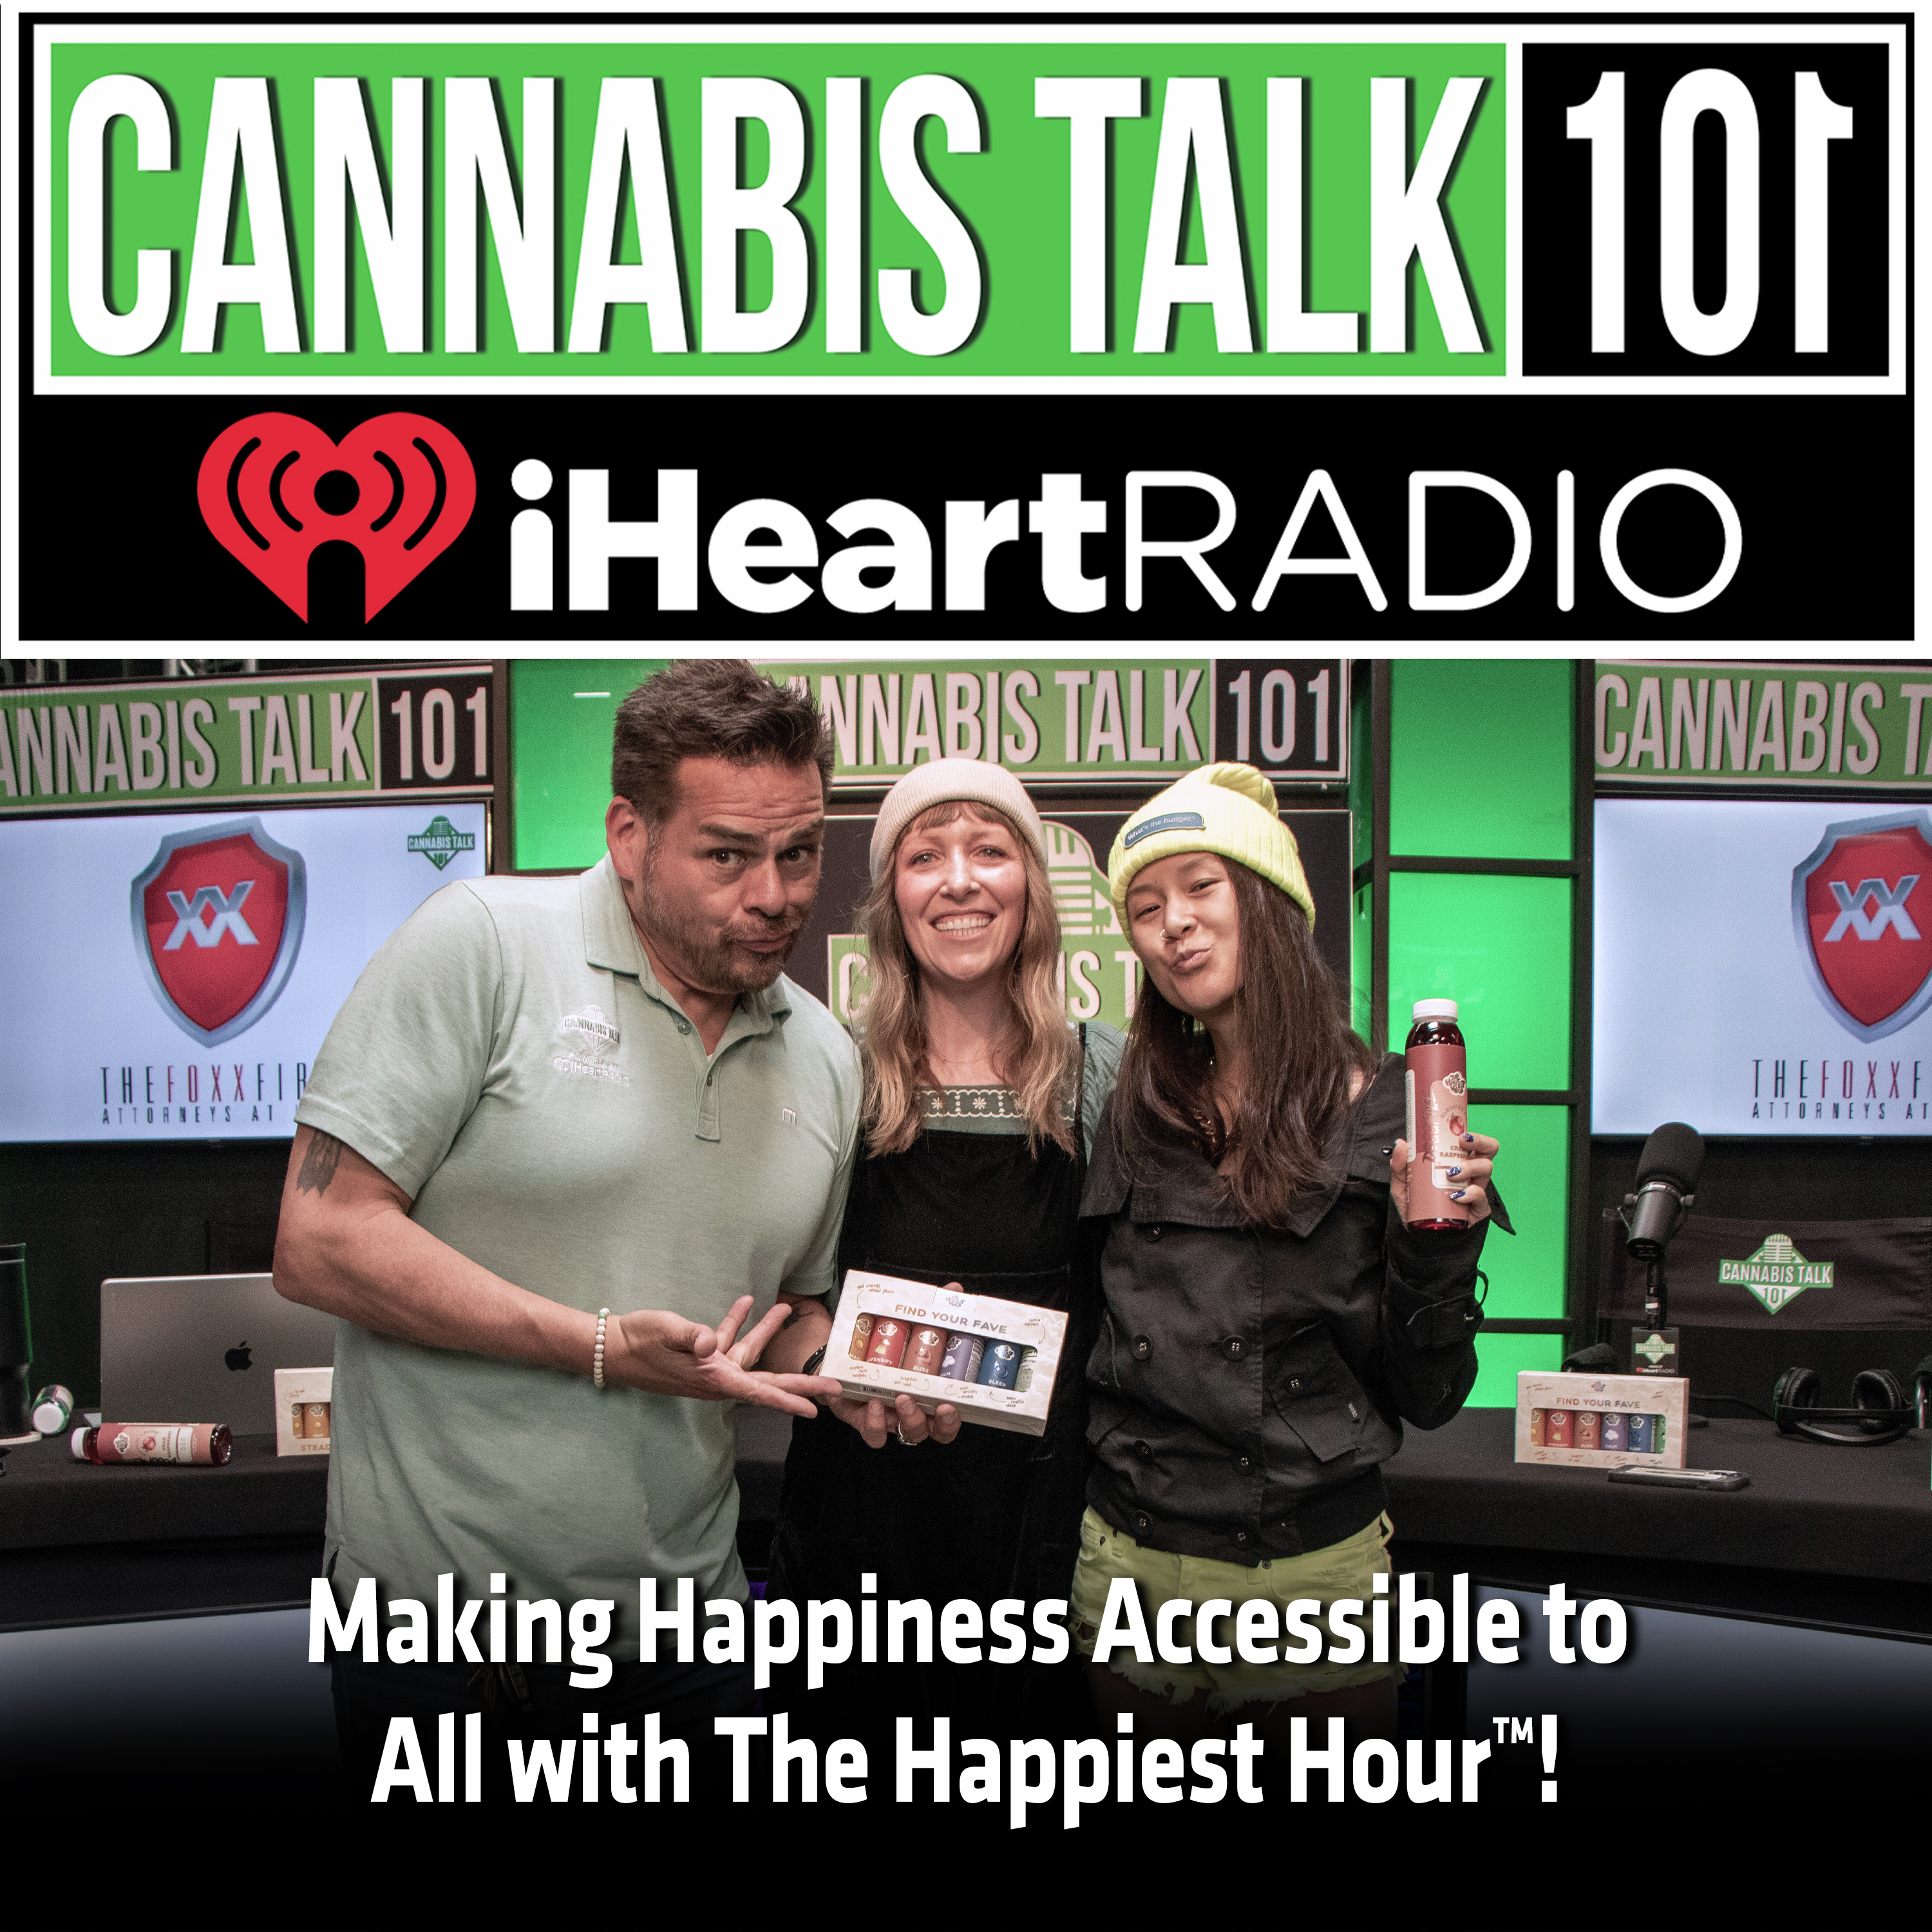 Making Happiness Accessible to All with The Happiest Hour™!